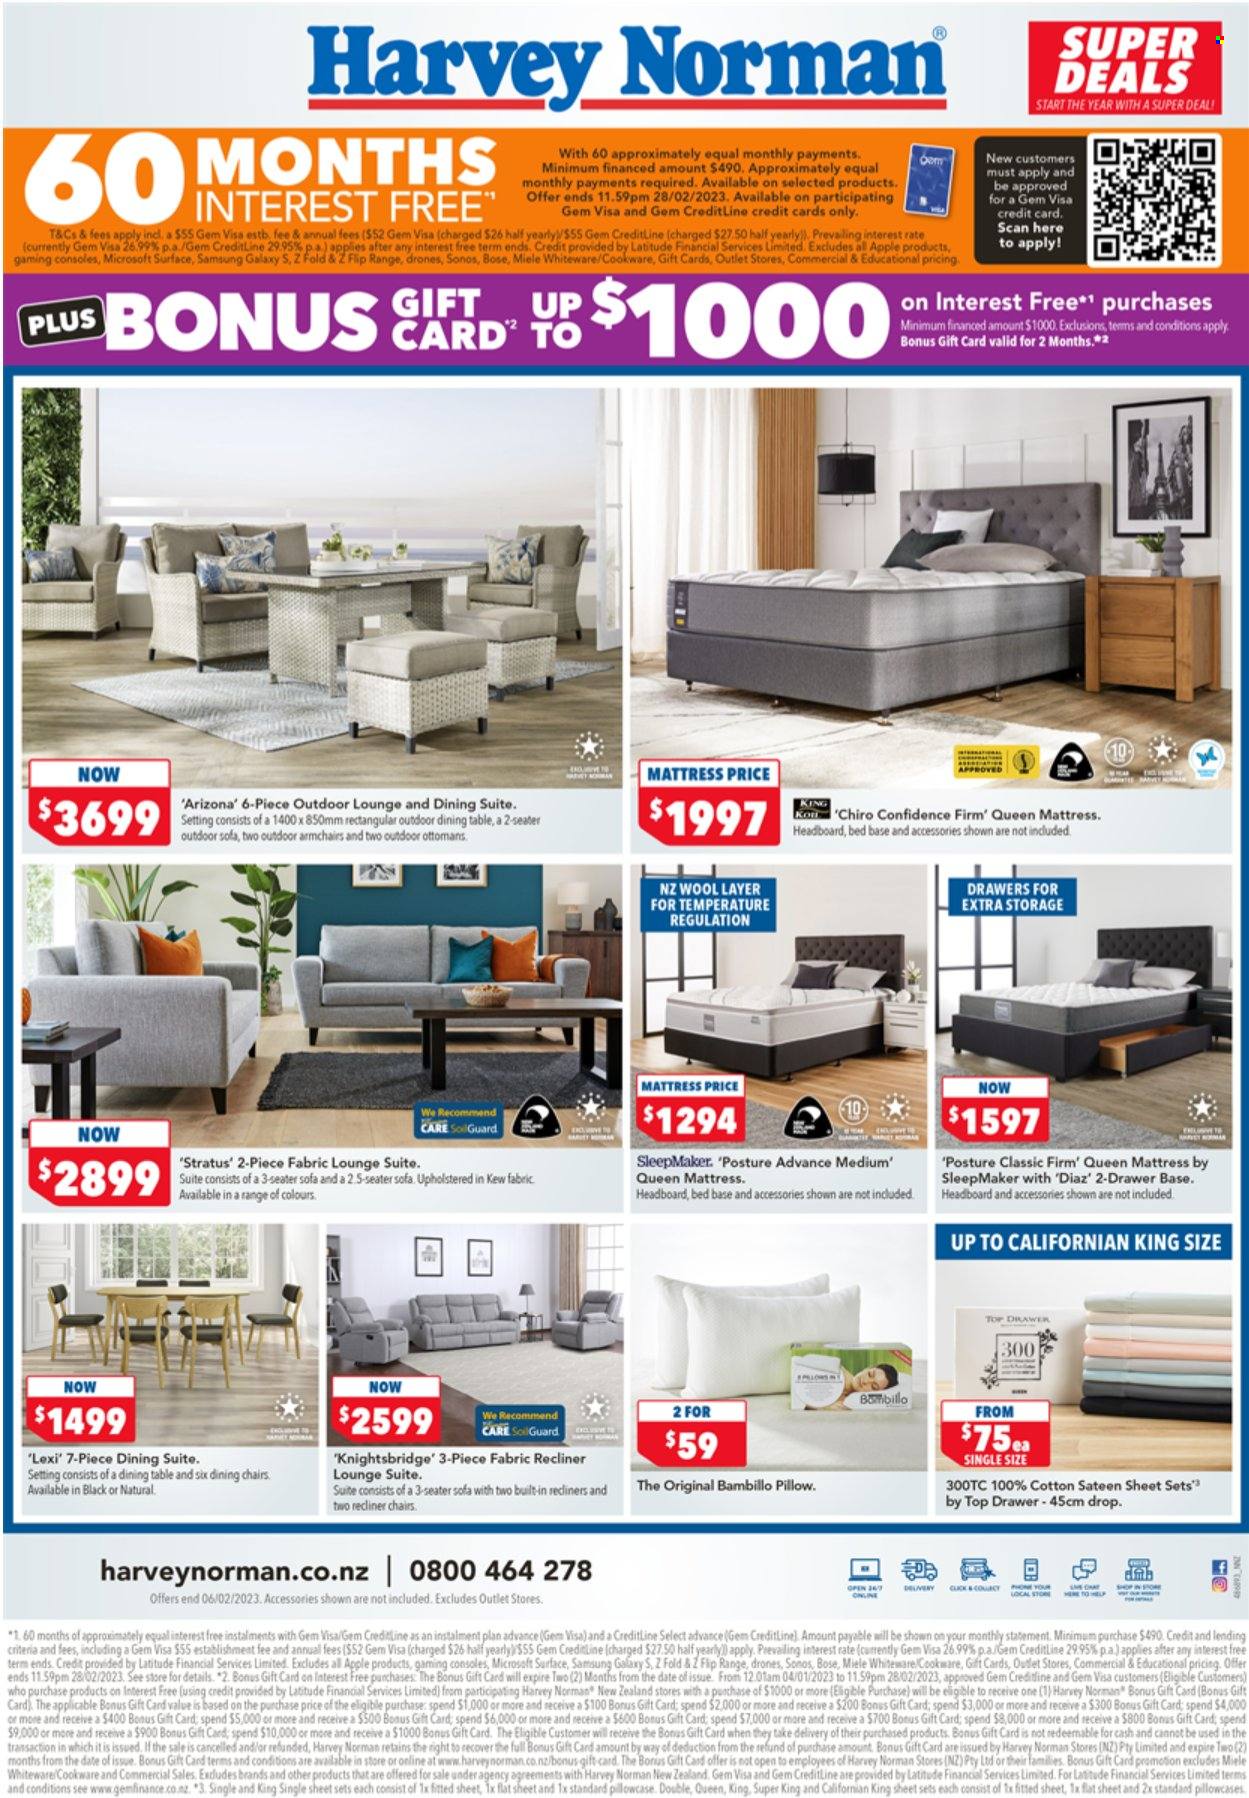 thumbnail - Harvey Norman mailer - 03.02.2023 - 06.02.2023 - Sales products - dining table, table, chair, arm chair, sofa, recliner chair, lounge suite, lounge, drawer base, bed, headboard, mattress, Apple, Samsung Galaxy, pillow, pillowcase, drone, Samsung, Samsung Galaxy S, Sonos, BOSE, Miele. Page 5.